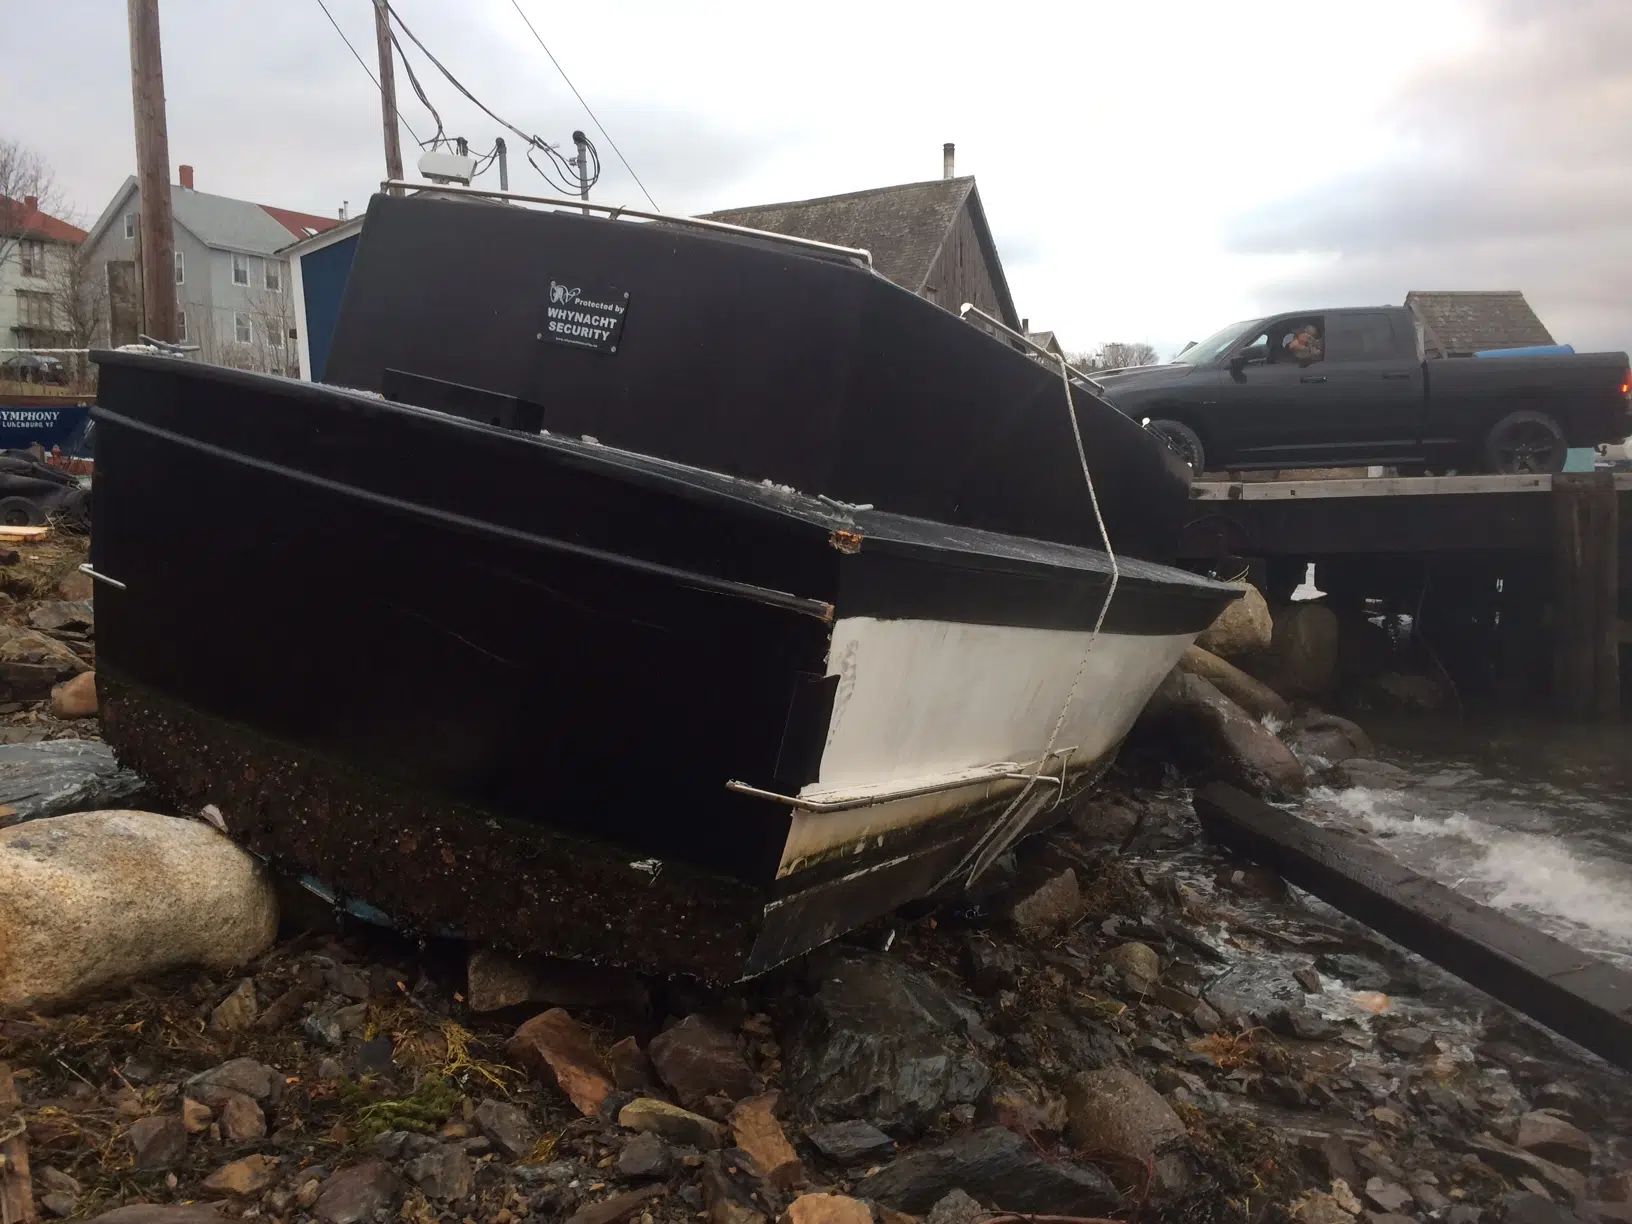 Boat Carrying Rum Runs Aground During Storm